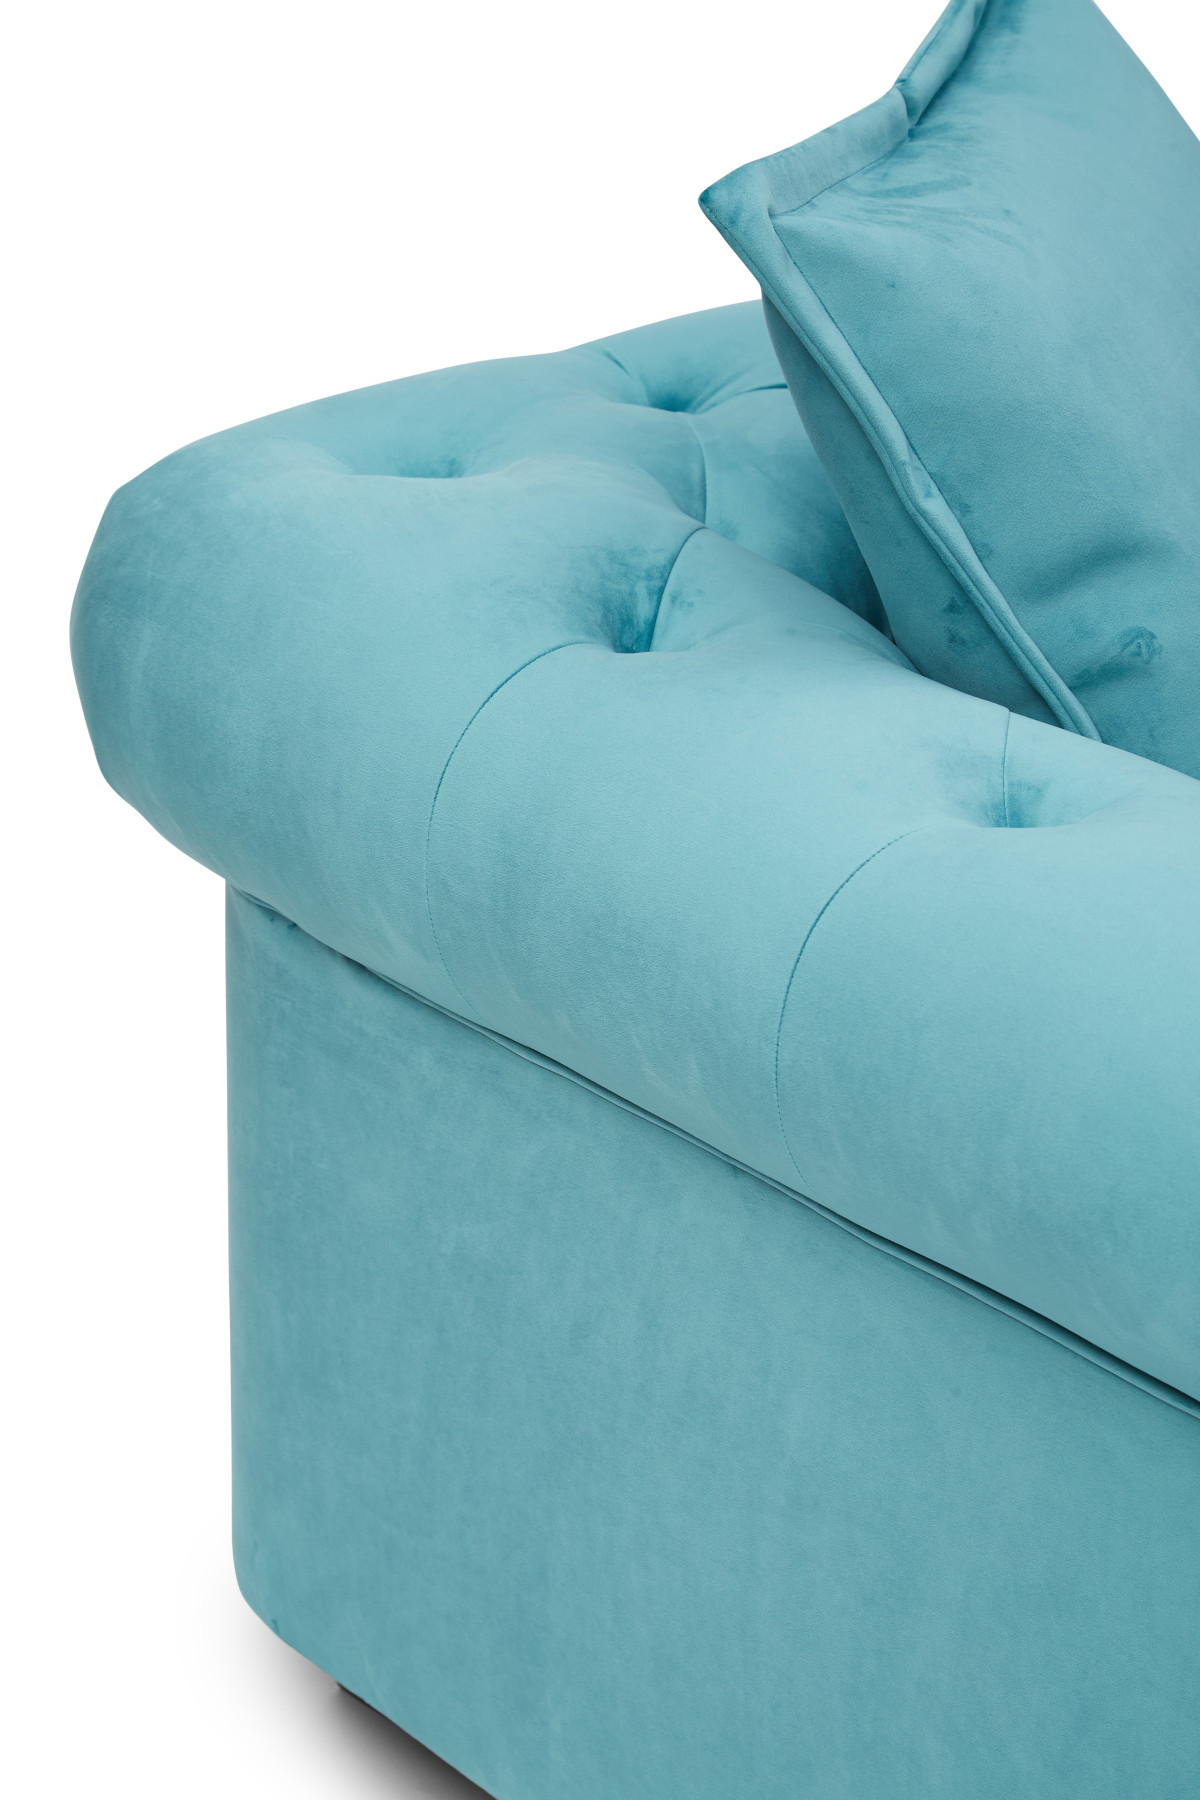 Kennedy 2 Seater Hermit Sofa (Teal)